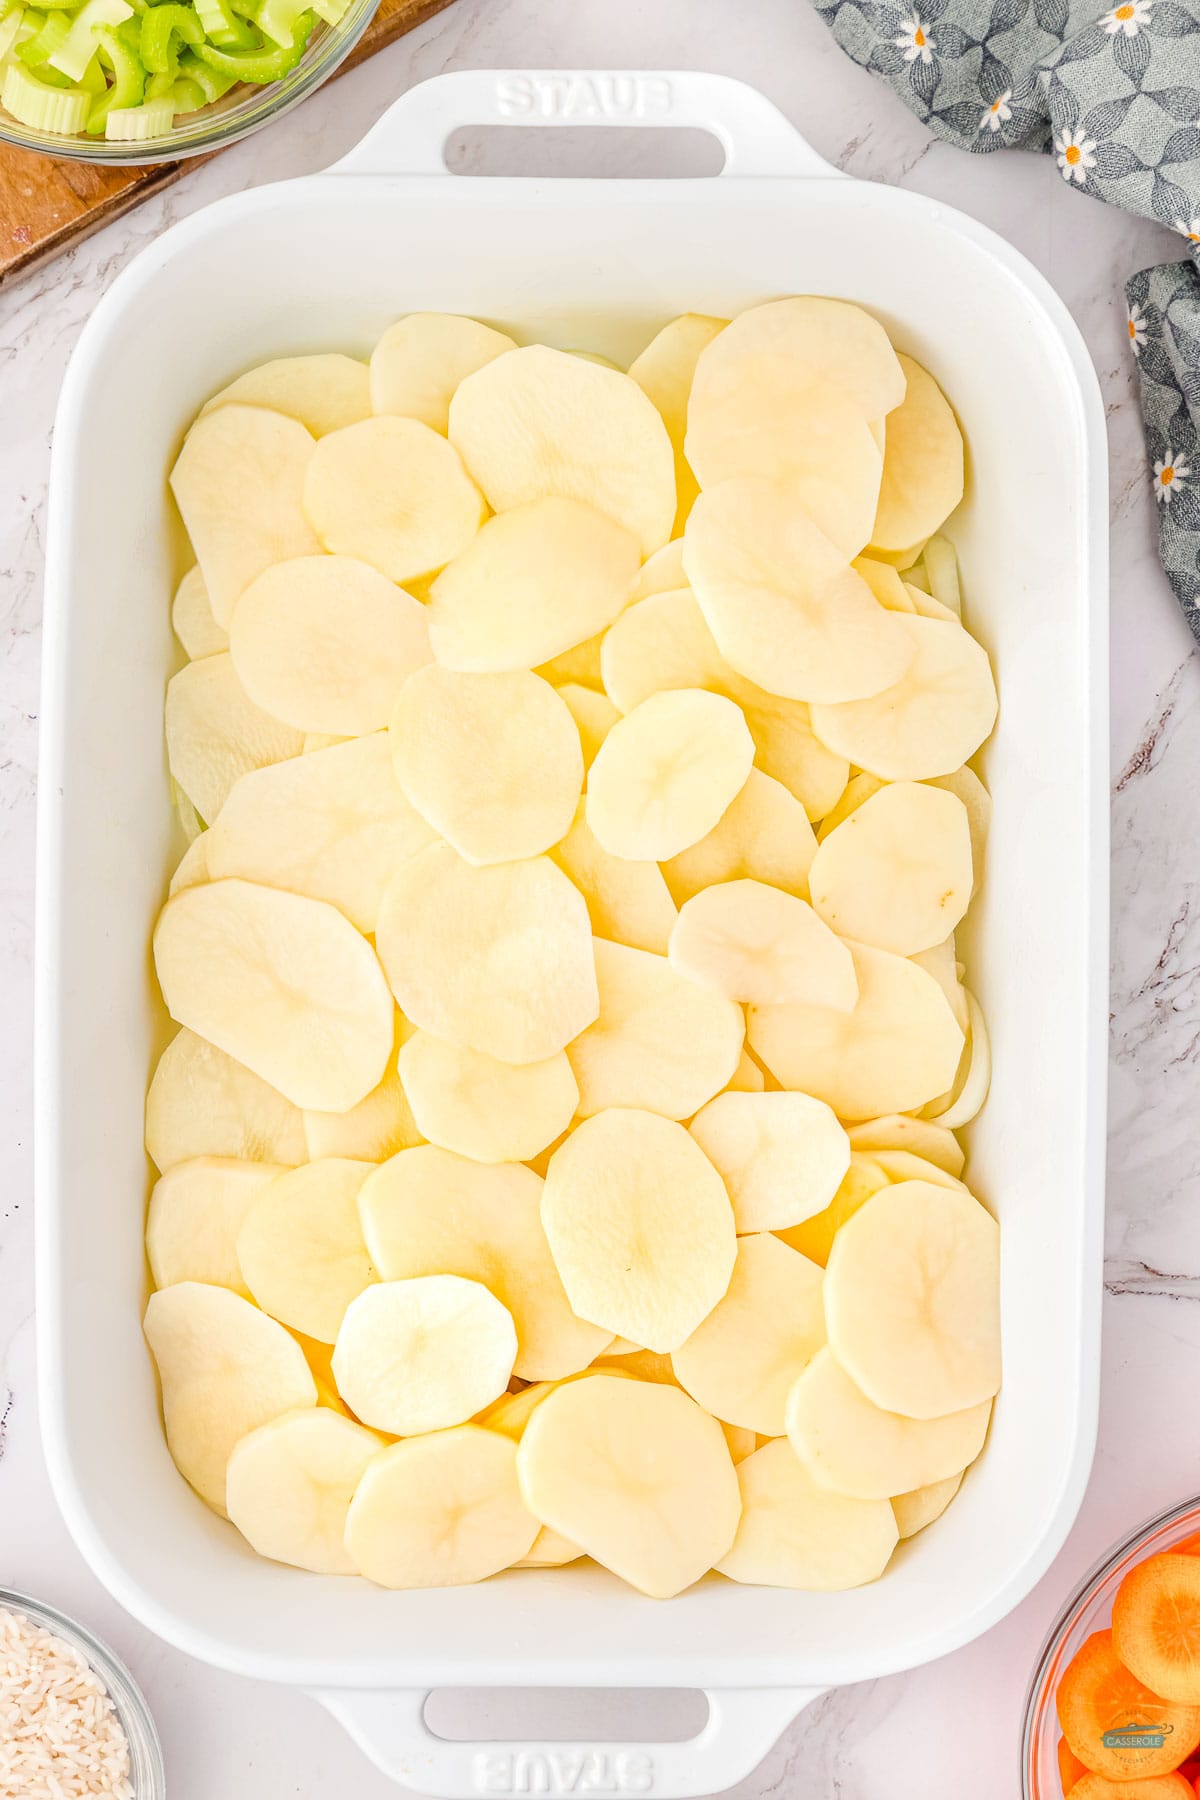 sliced onions and potatoes in a basserole dish